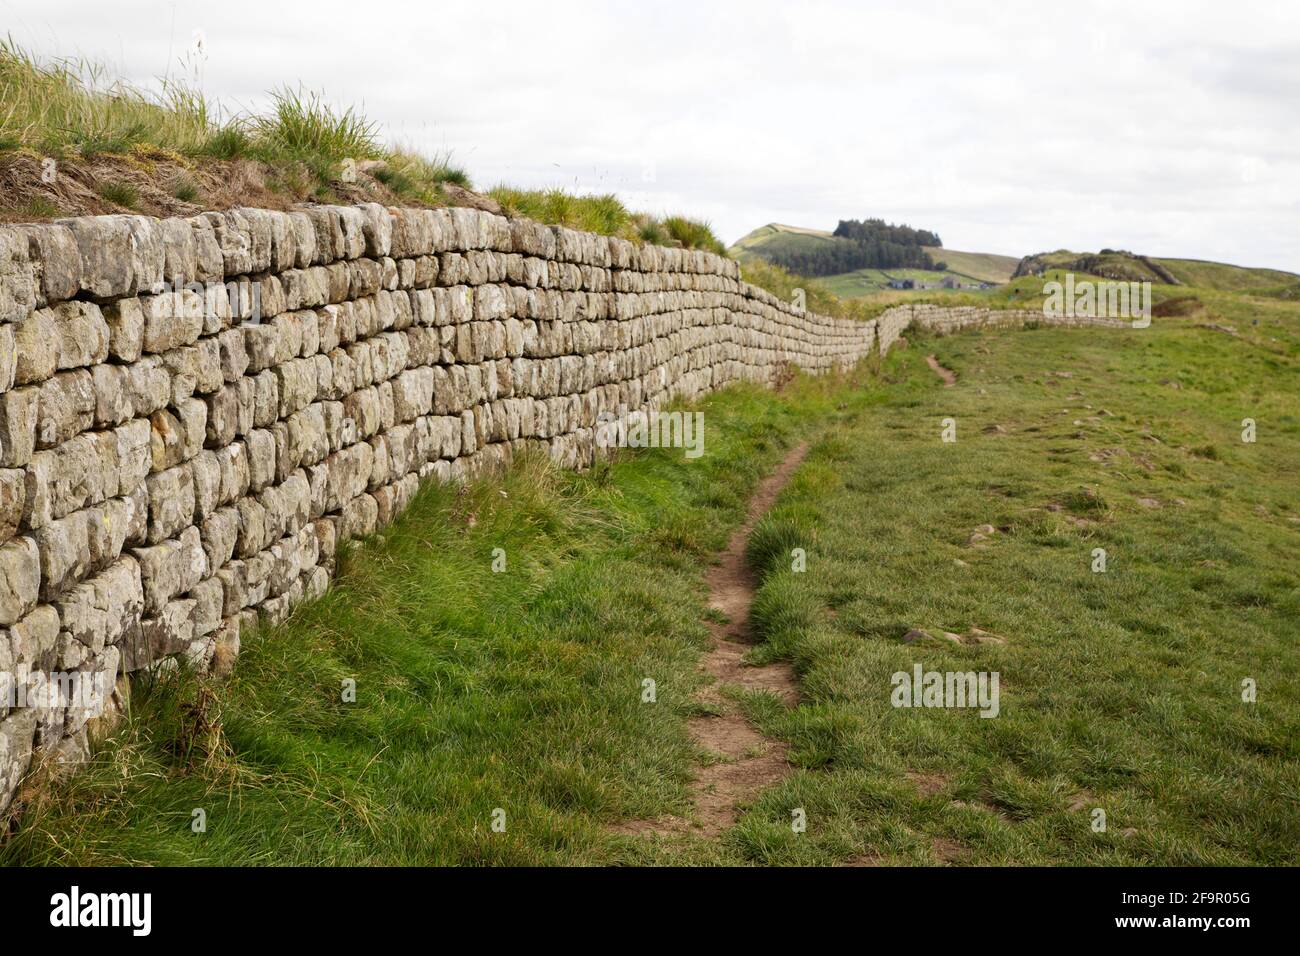 Footpath by Hadrian's Wall in Northumberland, England. The ancient monument is part of the Frontiers of the Roman Empire UNESCO World Heritage Site. Stock Photo